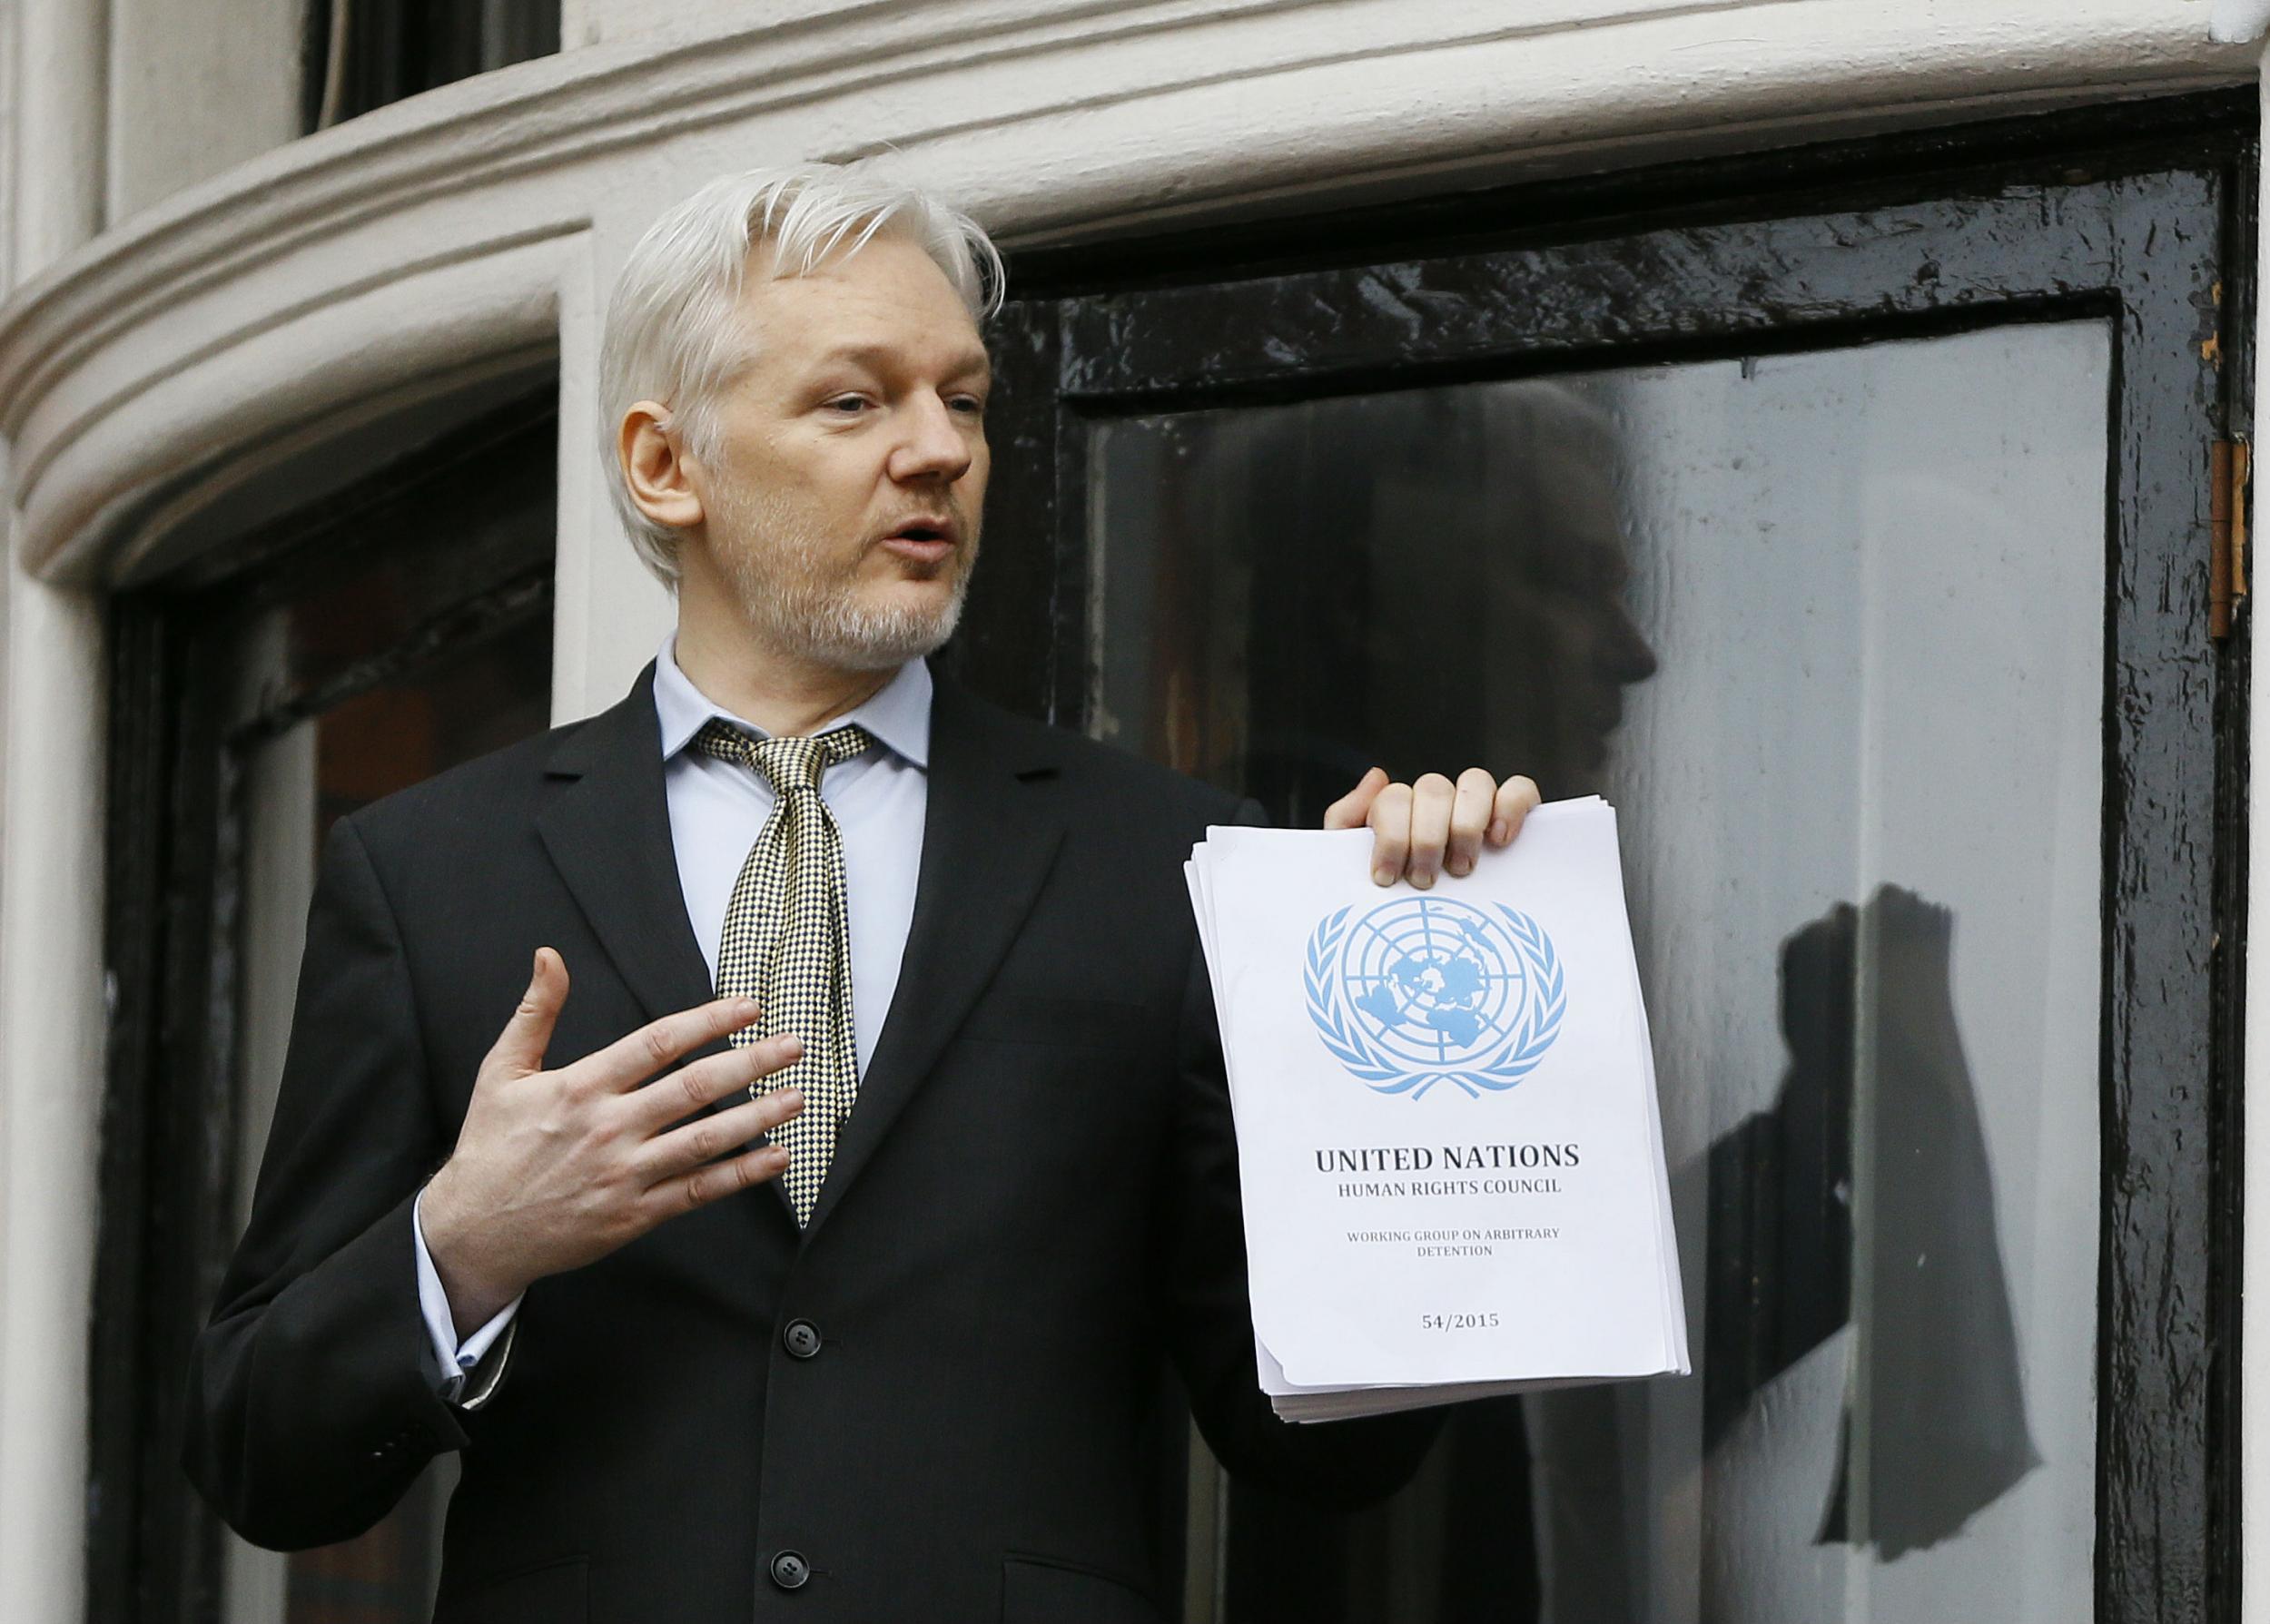 Mr Assange has long warned the US was seeking to detain him